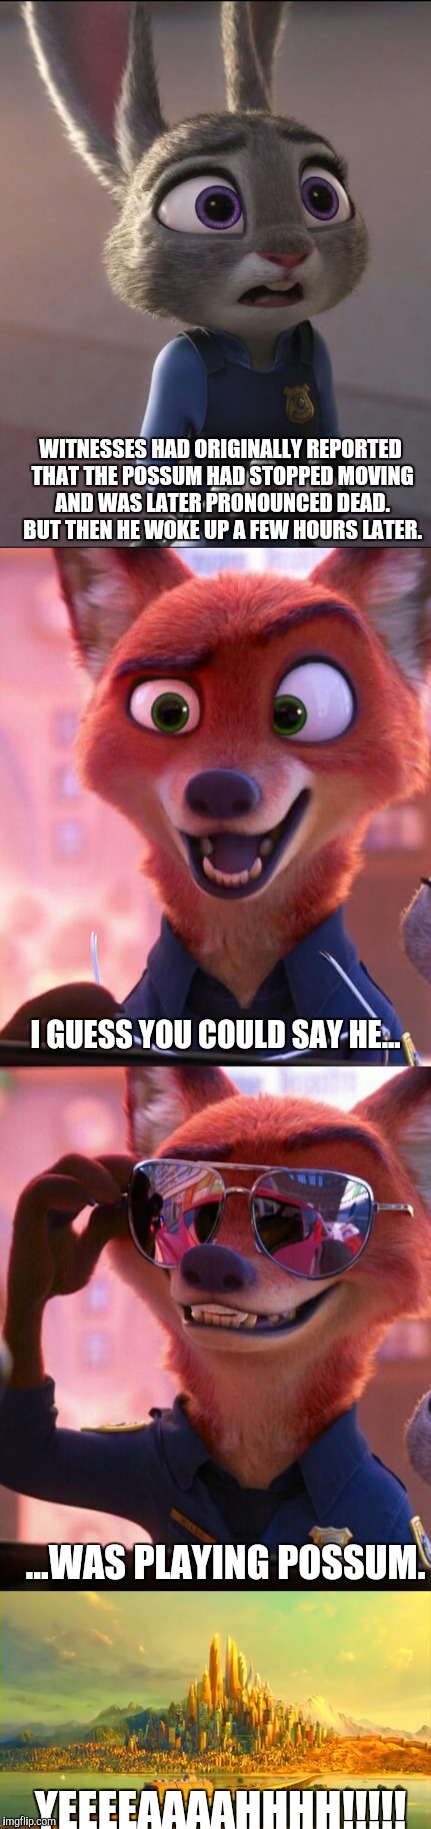 CSI: Zootopia | WITNESSES HAD ORIGINALLY REPORTED THAT THE POSSUM HAD STOPPED MOVING AND WAS LATER PRONOUNCED DEAD. BUT THEN HE WOKE UP A FEW HOURS LATER. I GUESS YOU COULD SAY HE... ...WAS PLAYING POSSUM. YEEEEAAAAHHHH!!!!! | image tagged in zootopia,judy hopps,nick wilde,parody,funny,memes | made w/ Imgflip meme maker